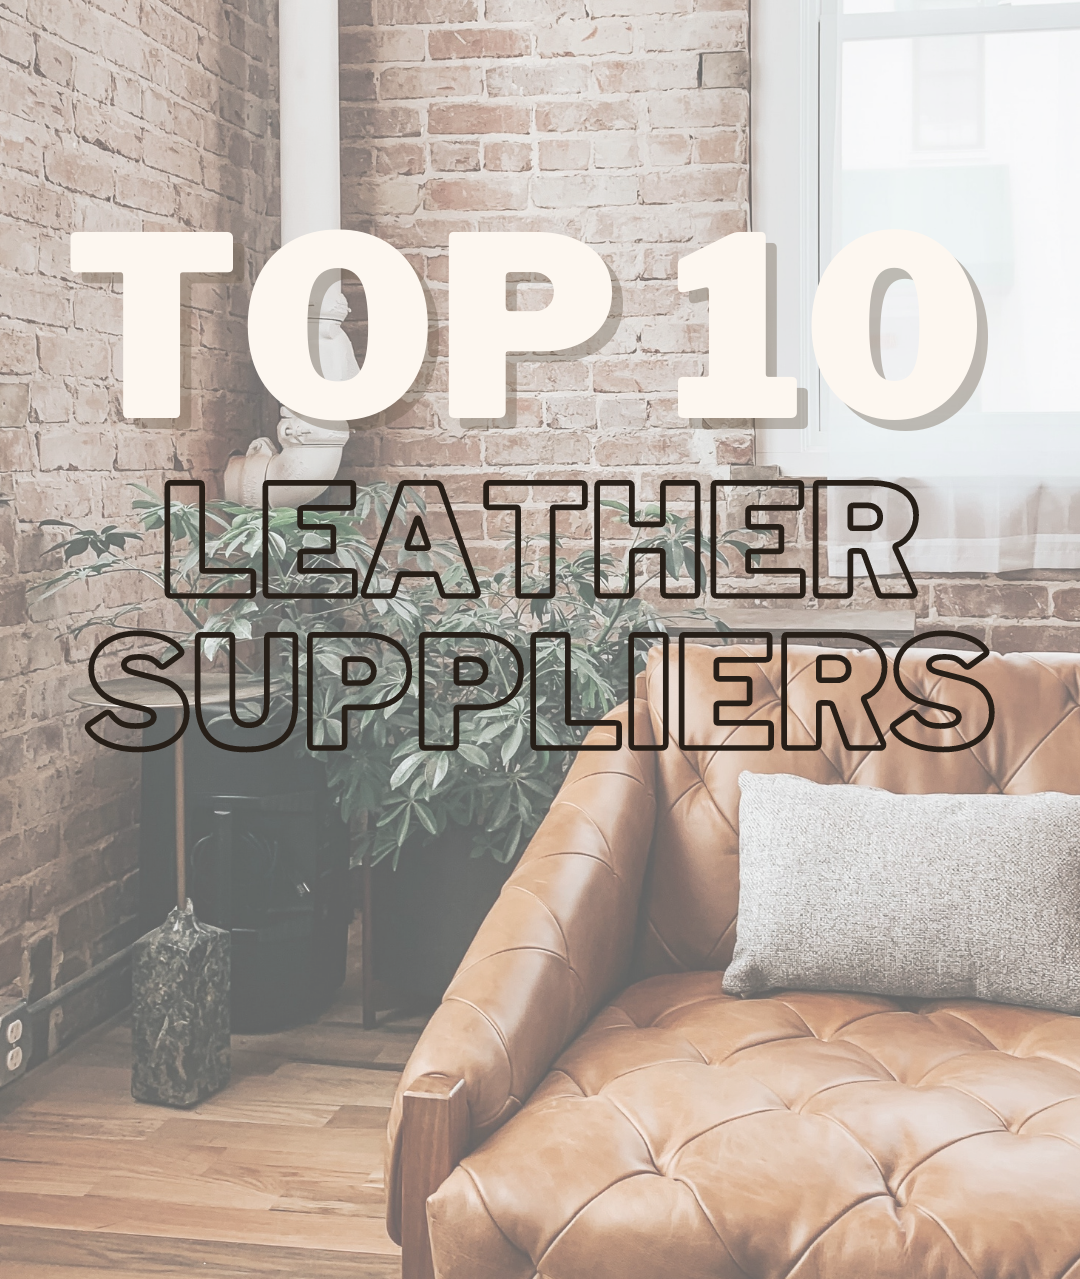 Top 10 Leather Suppliers